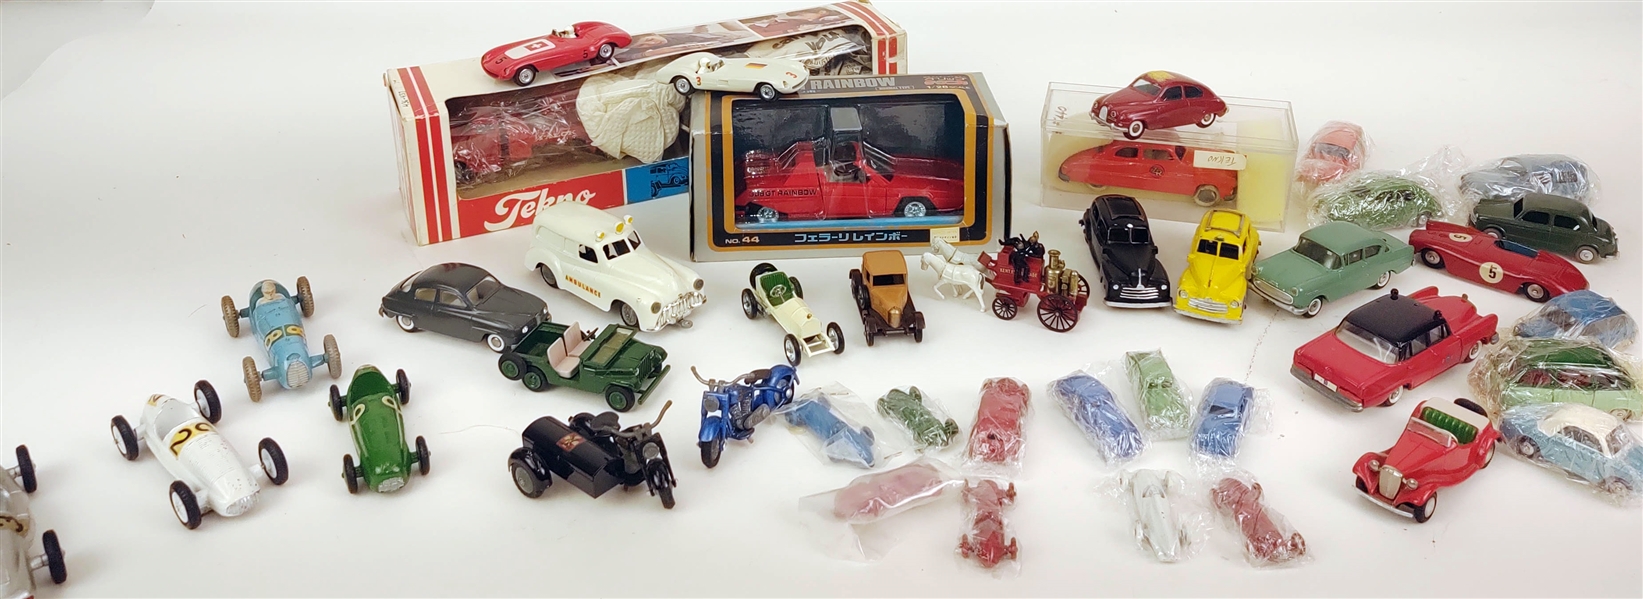 Tekno Toy Cars, Motorcycles, and more (Lot of 40)